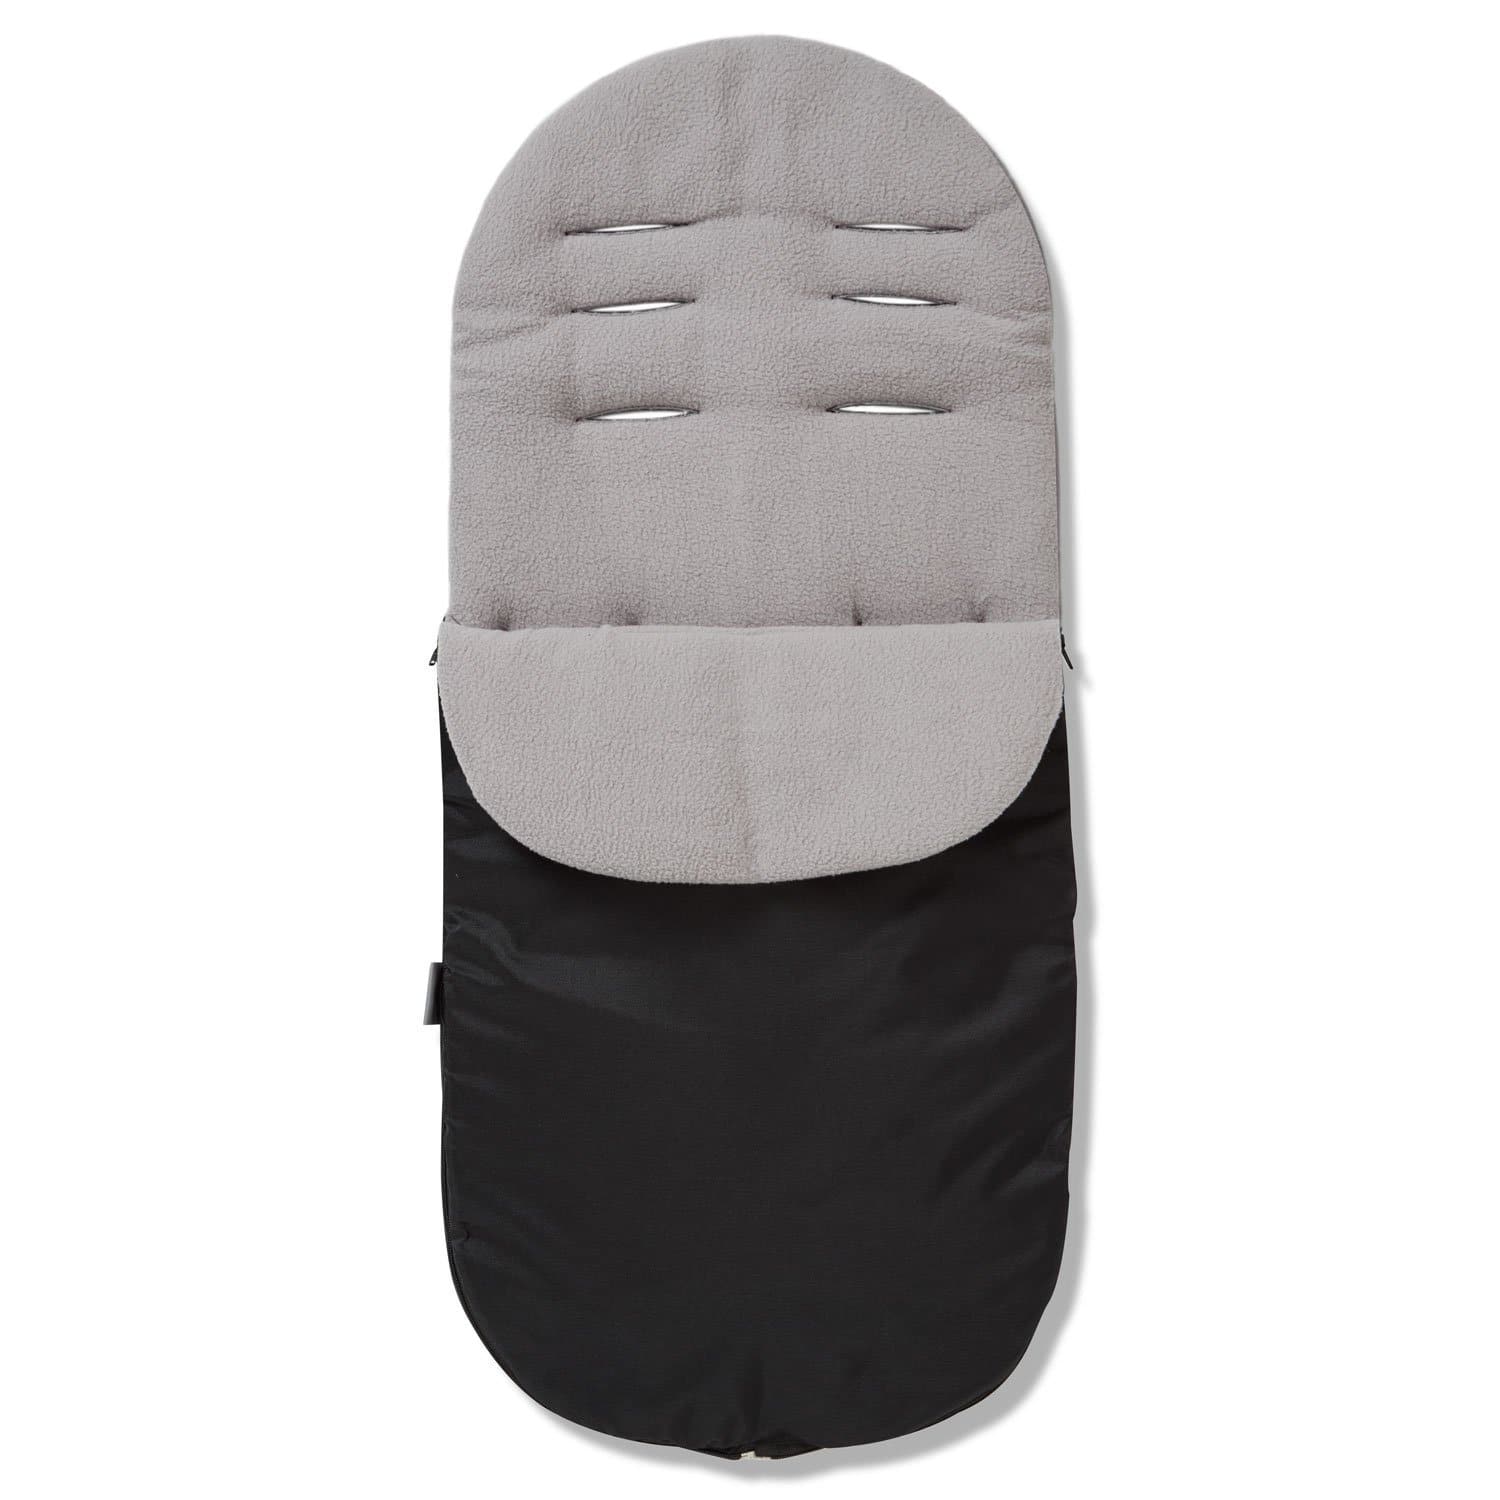 Footmuff / Cosy Toes Compatible with Peg Perego - For Your Little One